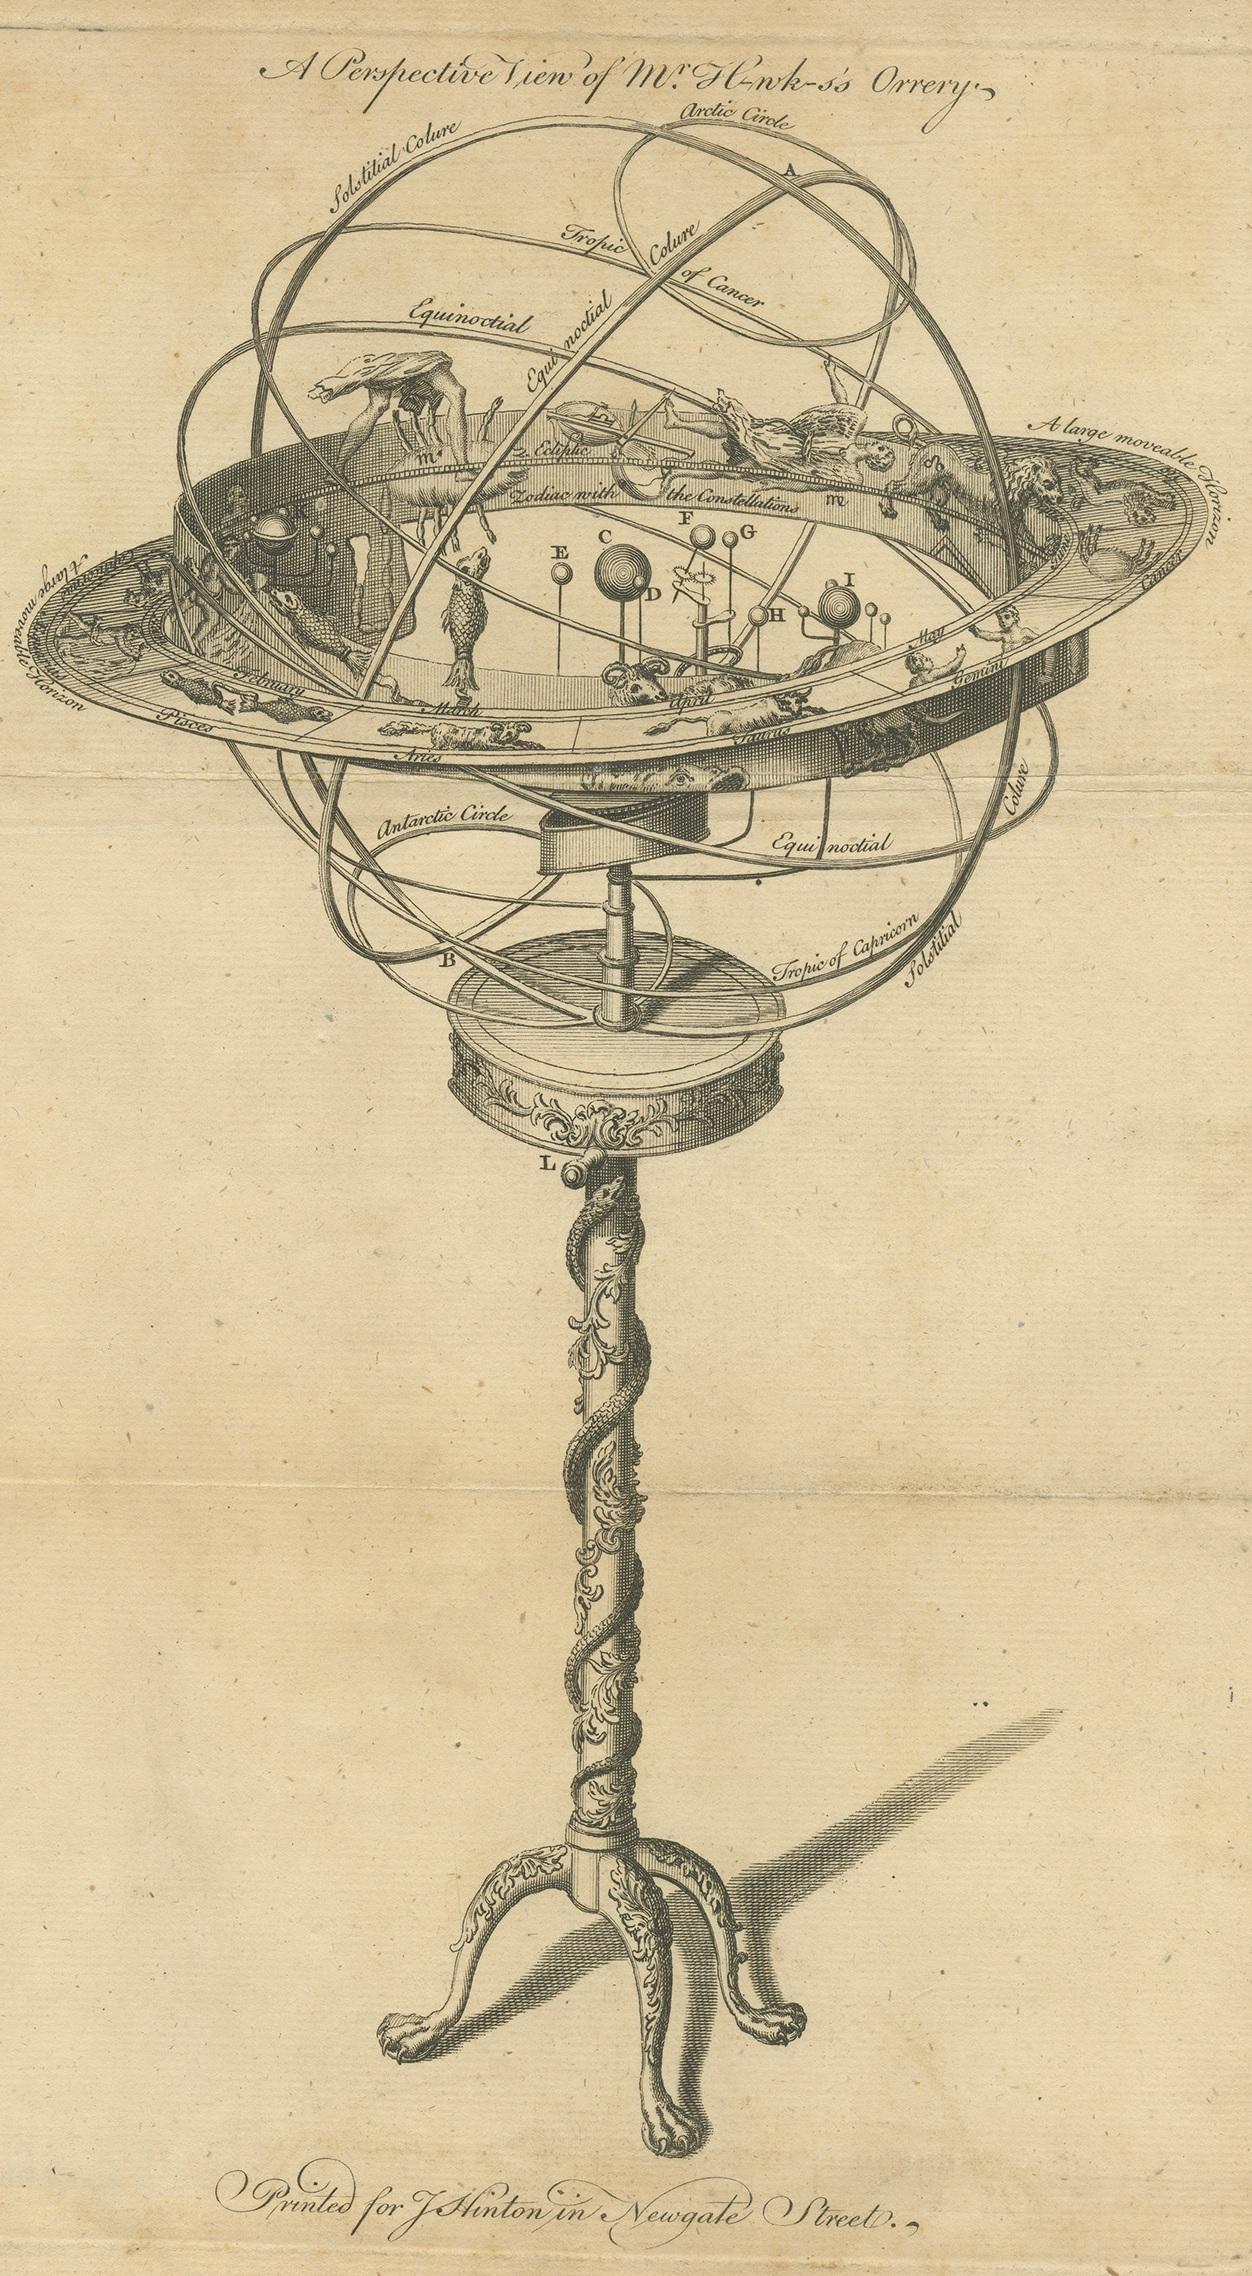 Antique print titled 'A Perspective View of Mr. Hawks's Orrery'. Copper engraving of an orrery. An Orrery is a mechanical model of the solar system that illustrates or predicts the relative positions and motions of the planets and moons, usually